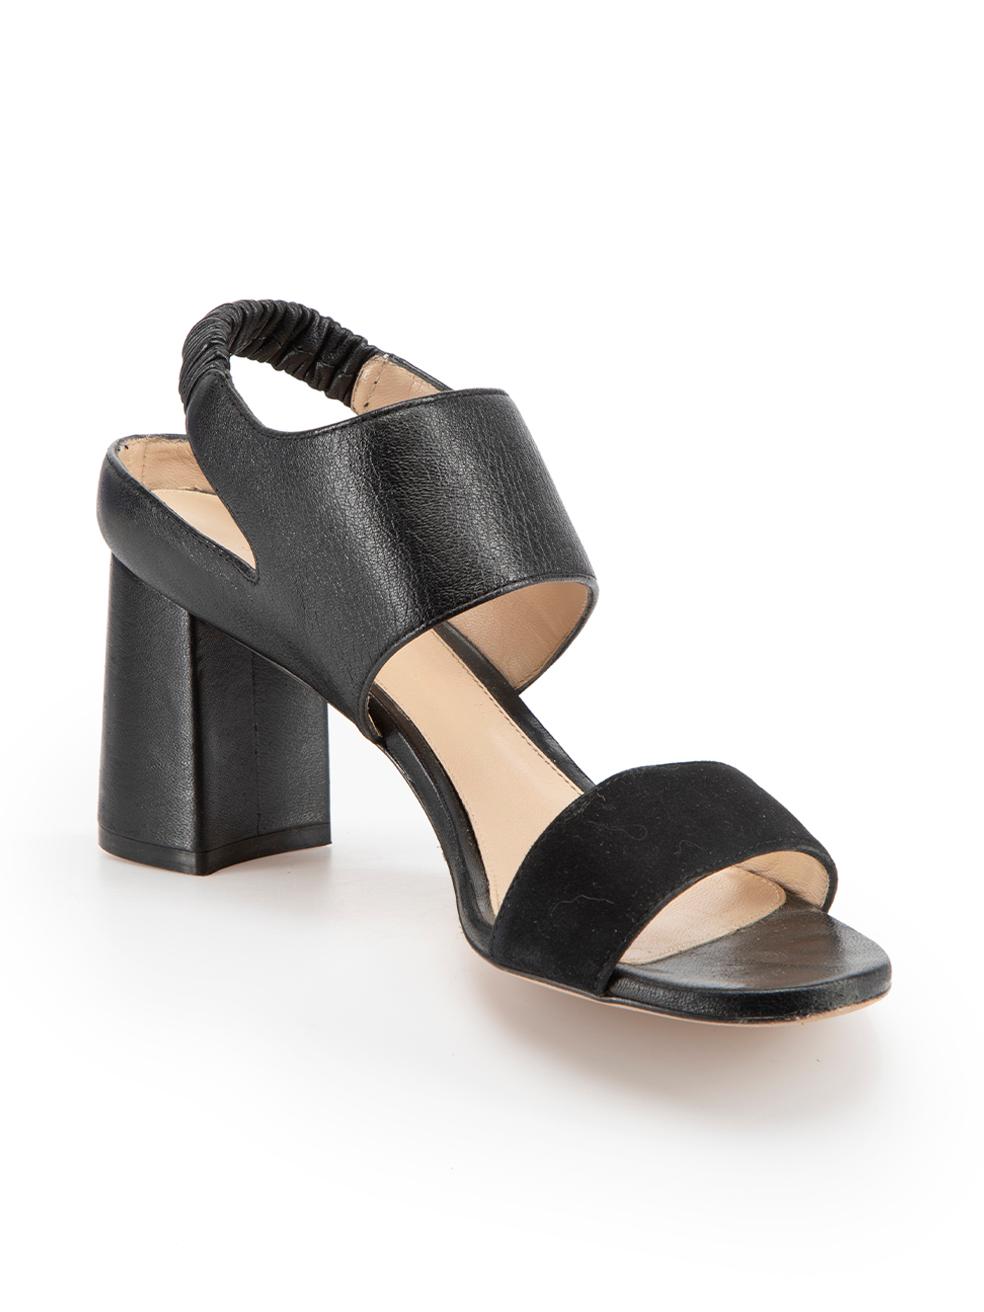 CONDITION is Very good. Minimal wear to is evident. Minimal wear to soles with some scuffing seen on this used Stuart Weitzman designer resale item.



Details


Black

Leather

Sandals

Mid heel

Block heel

Open toe

Elasticated ankle